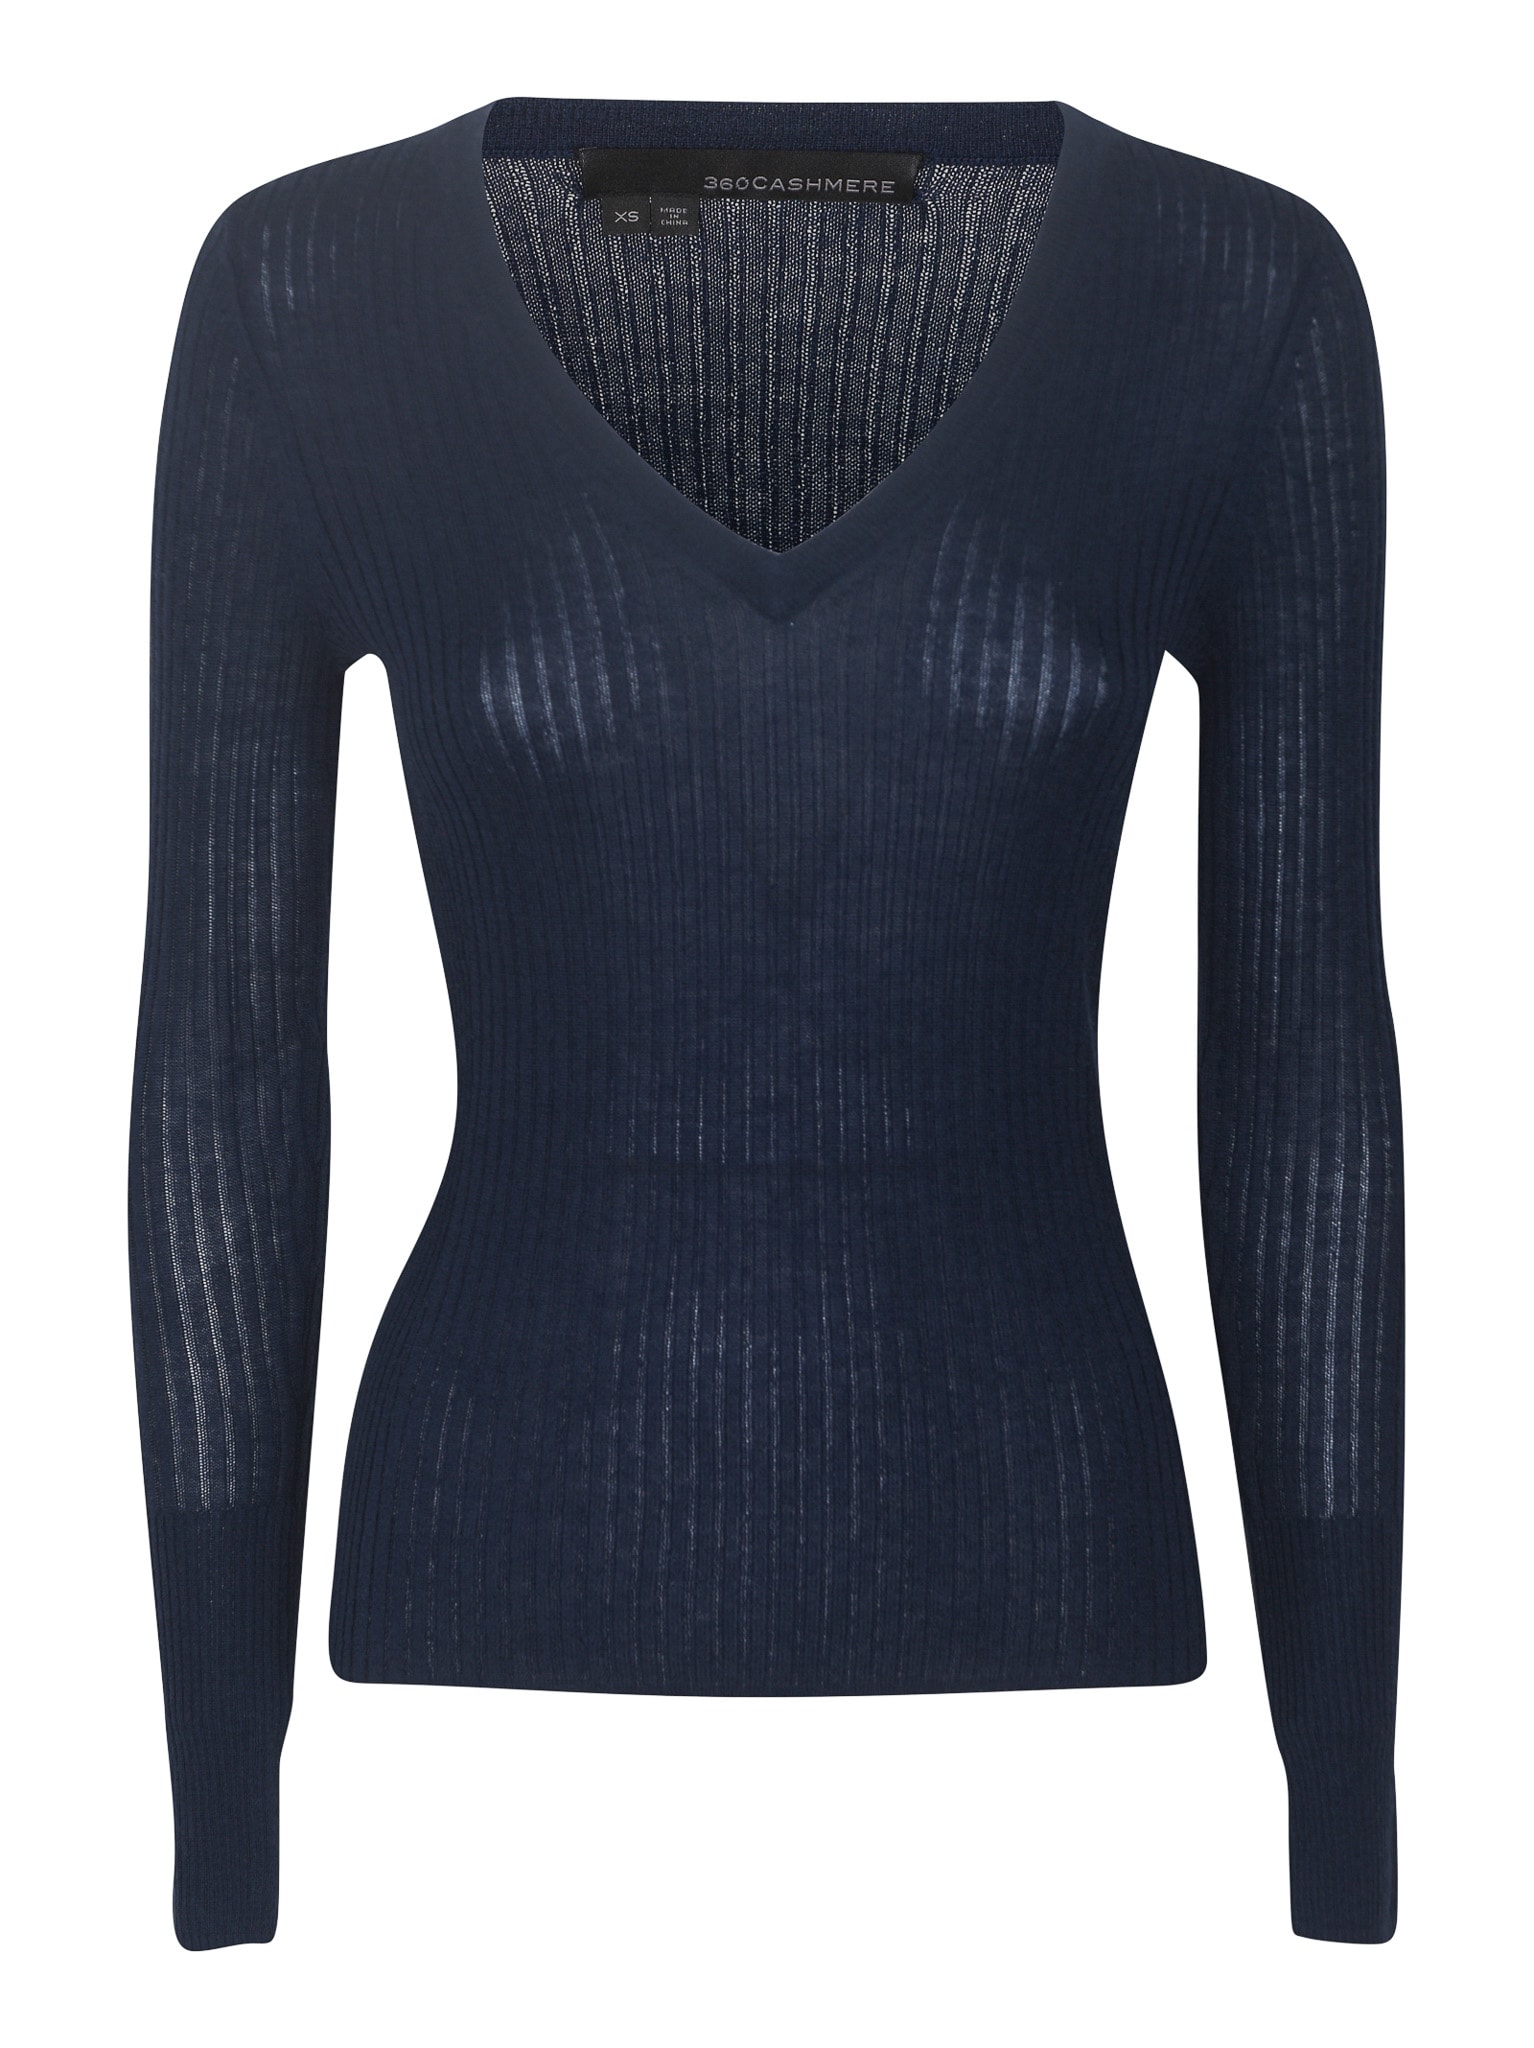 360cashmere V-neck Rib Knit Sweater In Navy